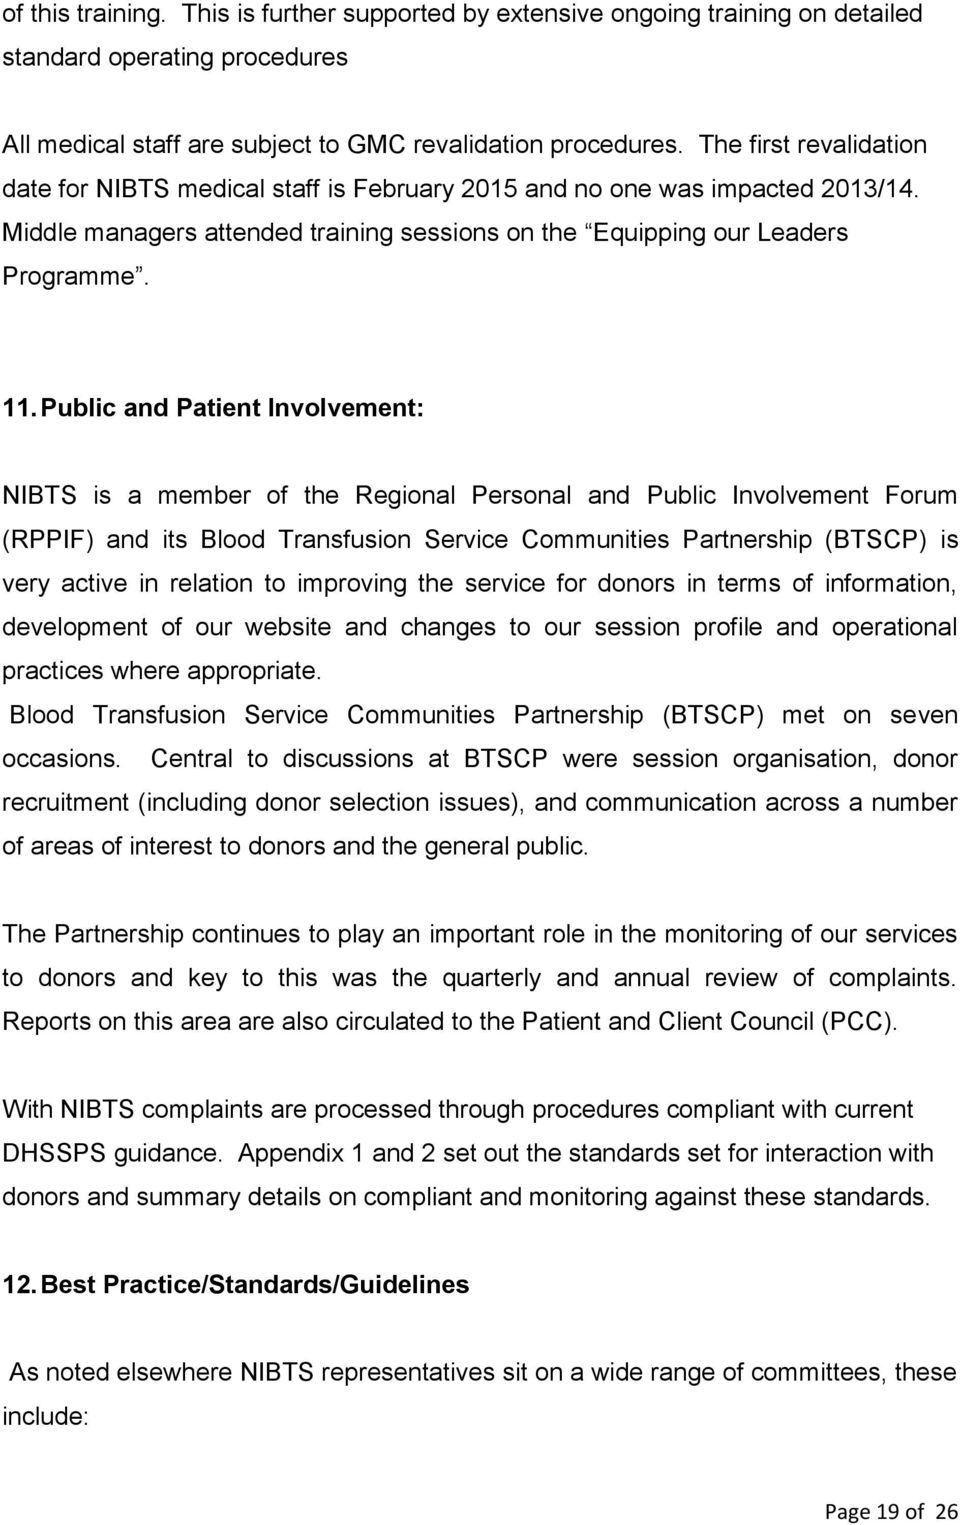 Public and Patient Involvement: NIBTS is a member of the Regional Personal and Public Involvement Forum (RPPIF) and its Blood Transfusion Service Communities Partnership (BTSCP) is very active in